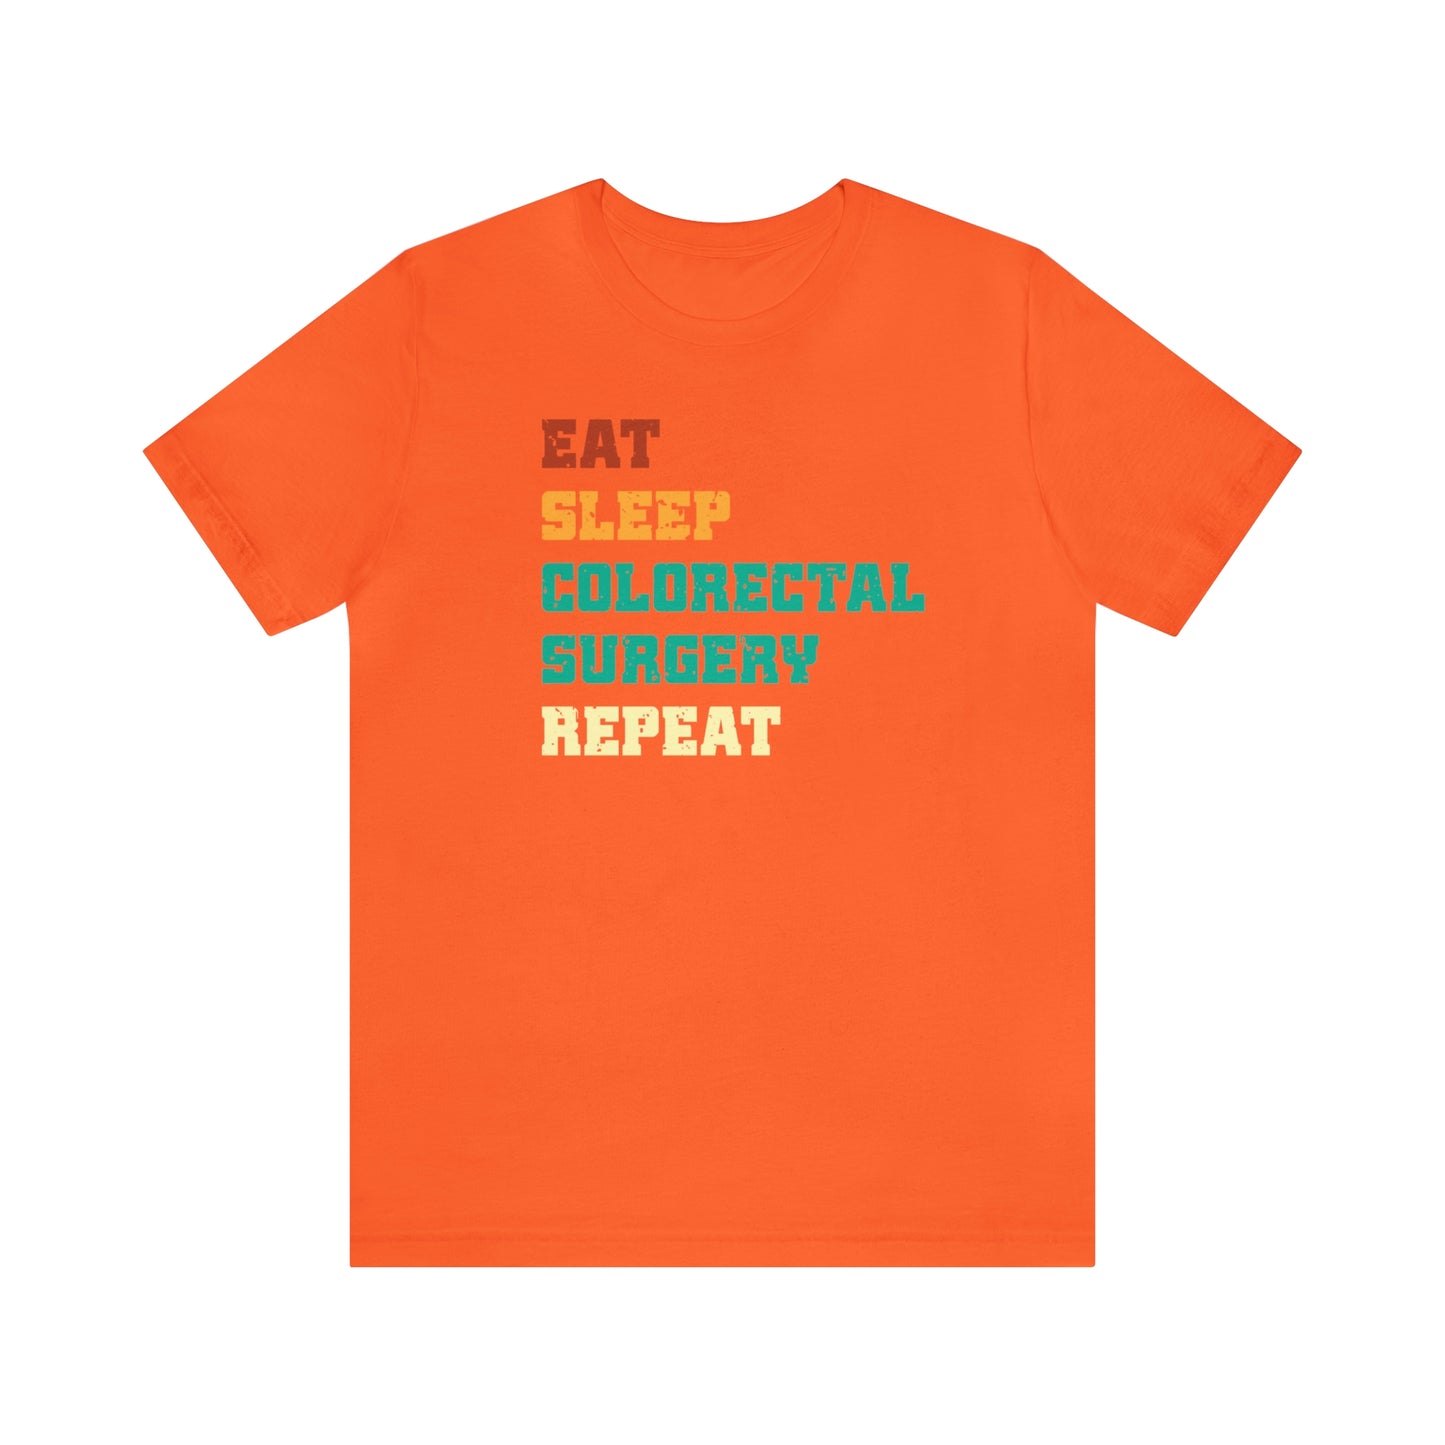 Eat Sleep Colorectal Surgery Repeat, Unisex T-shirt, Mothers Day, Fathers Day, Doctor, Surgeon, Surgical Team Gift